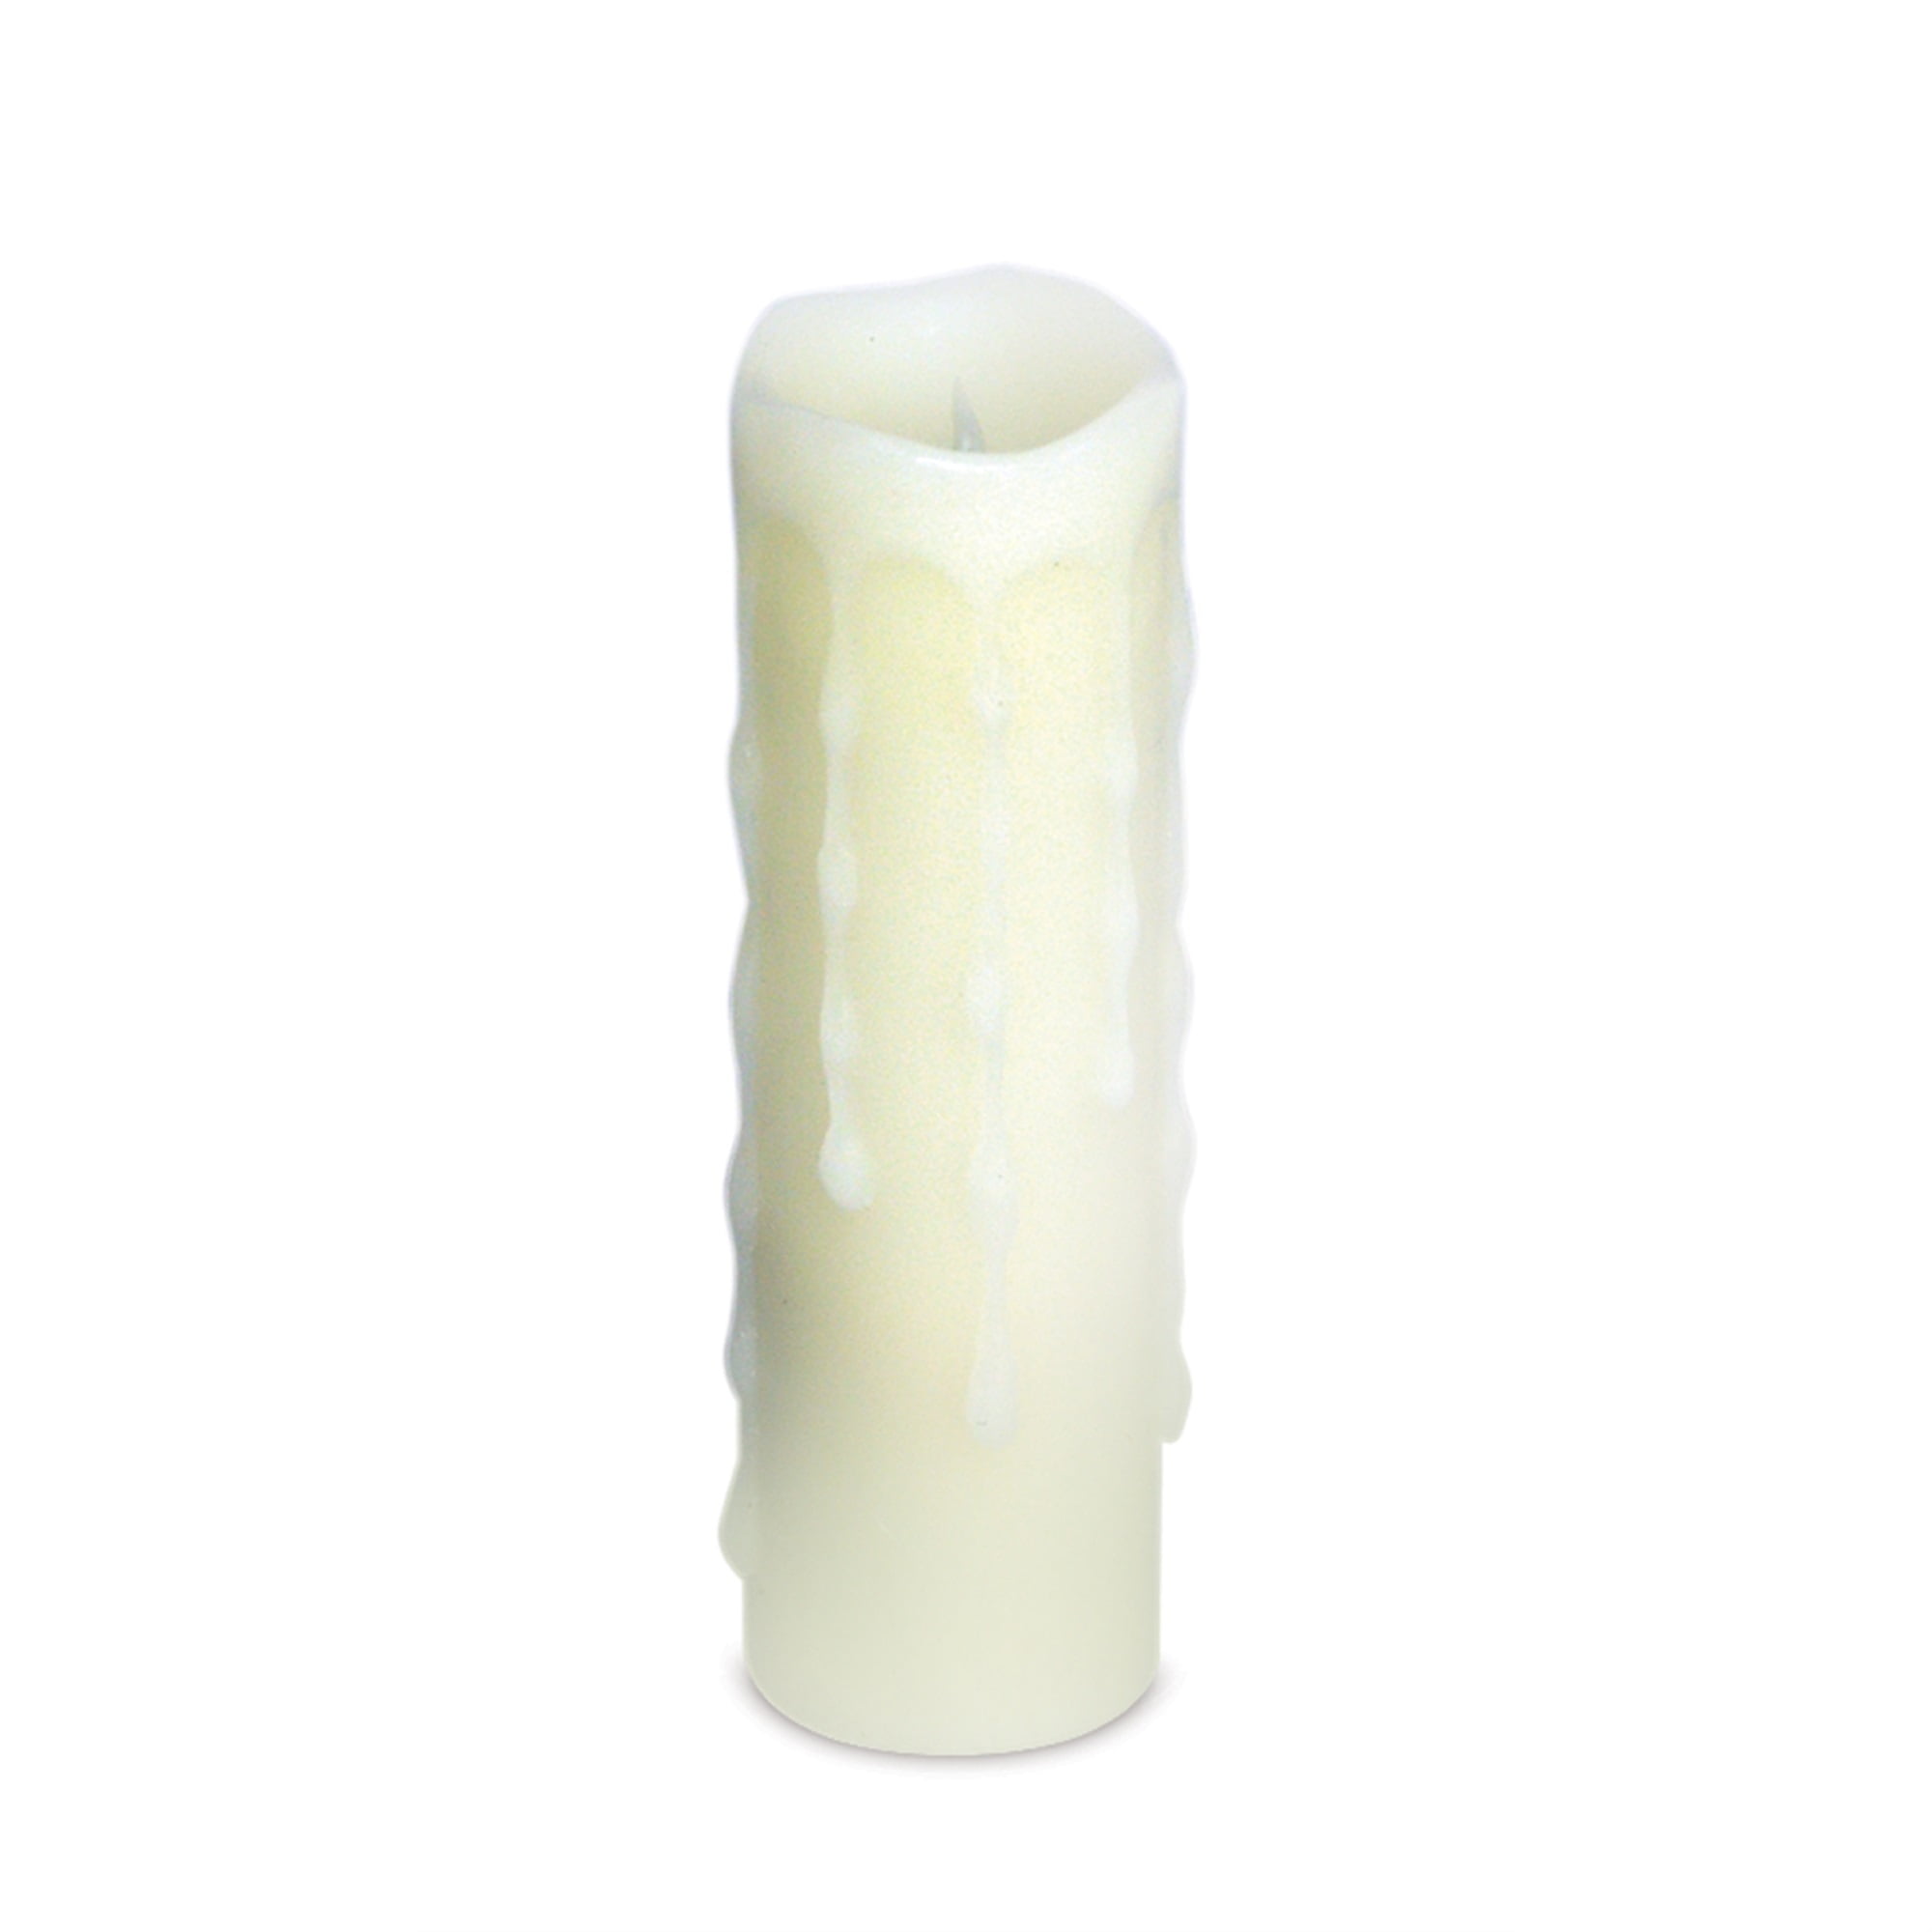 LED Wax Dripping Pillar Candle (Set of 6) 1.75"Dx6"H Wax/Plastic - 2 AA Batteries Not Incld